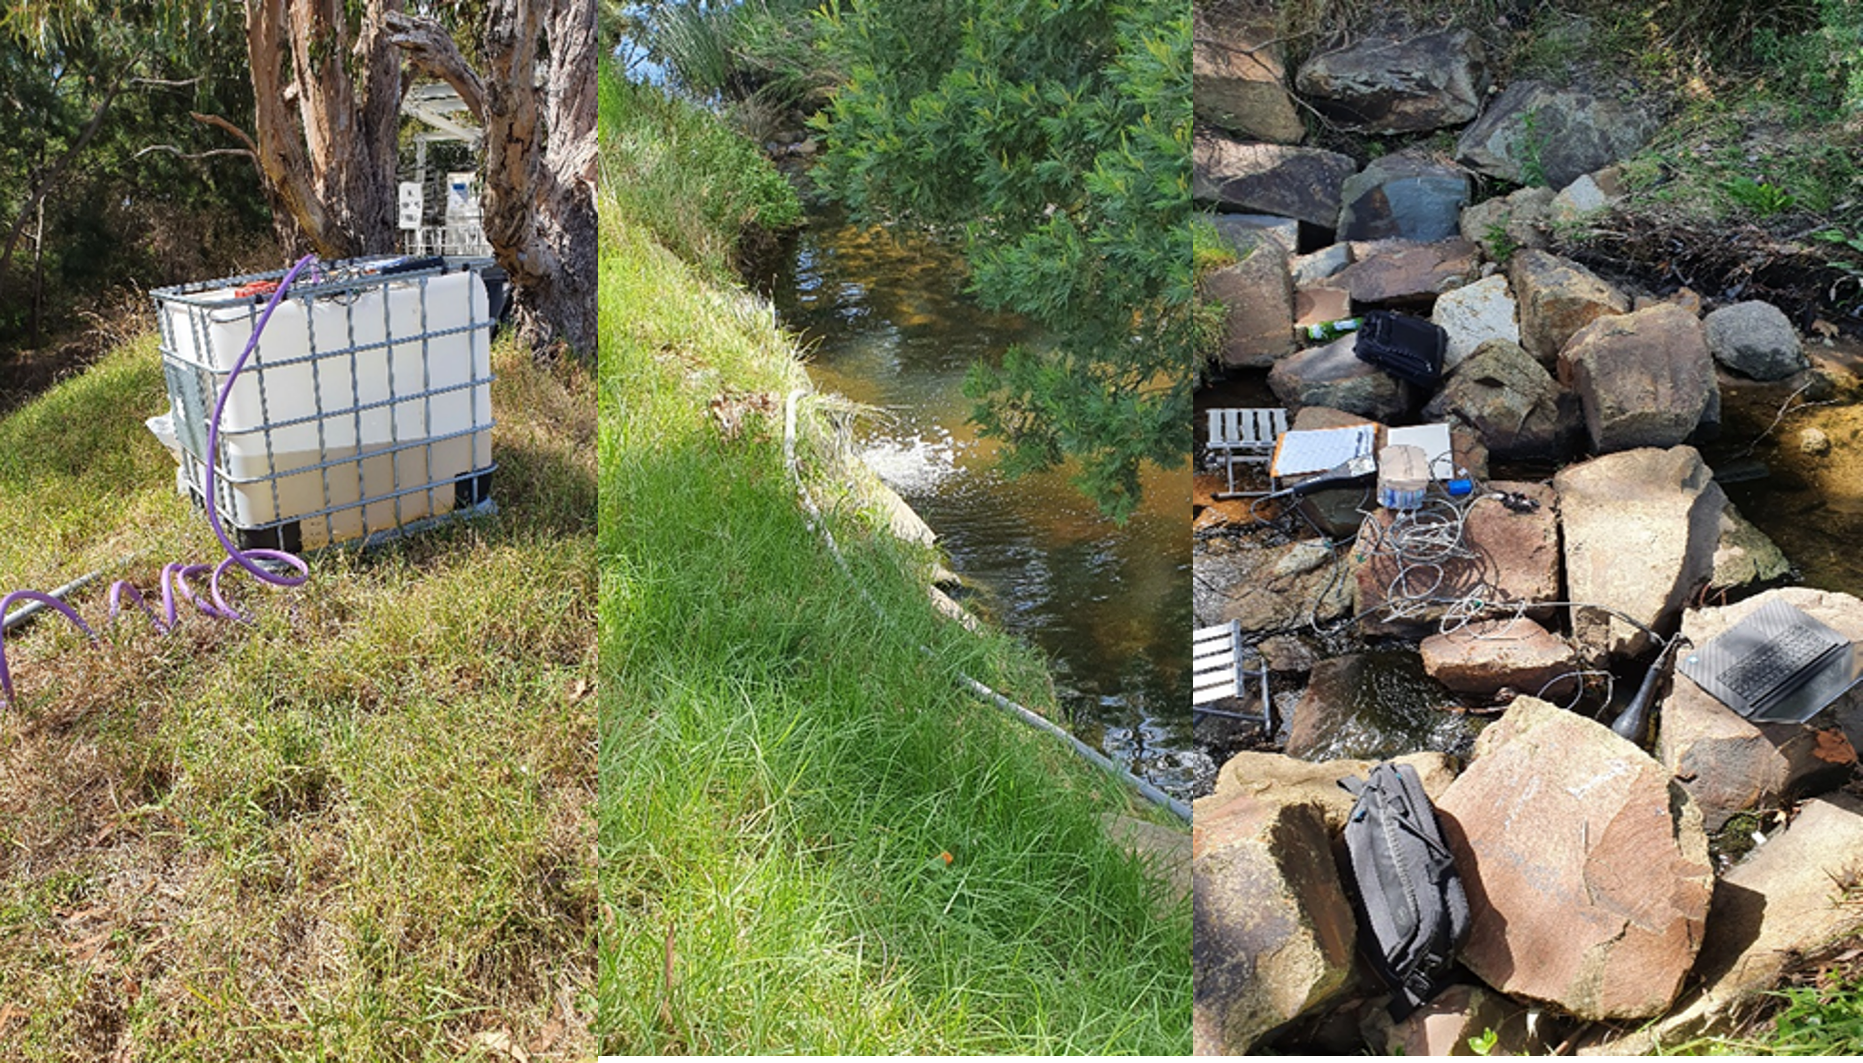 3 images show case study progress by depicting equipment on a grassy river bank and on rocks sticking out of a river